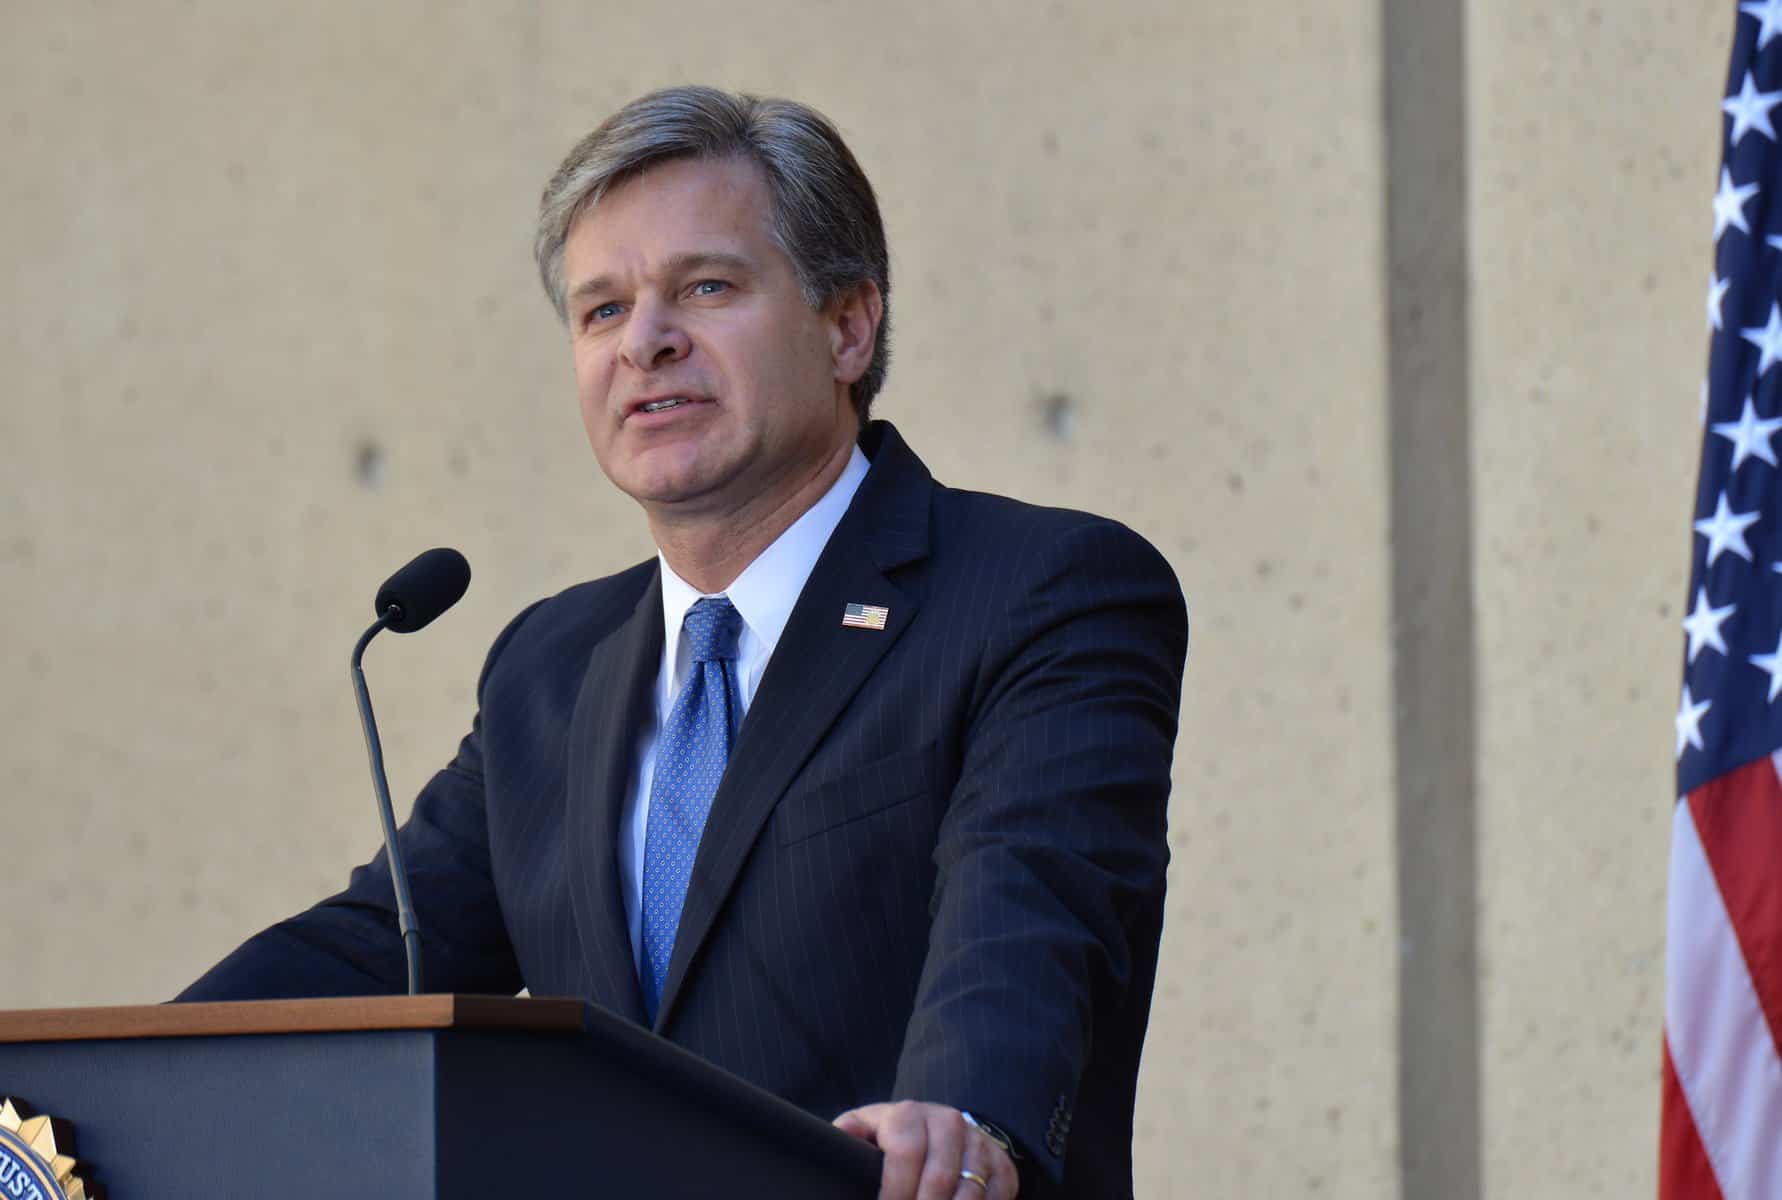 FBI Director Christopher Wray stands at a podium.